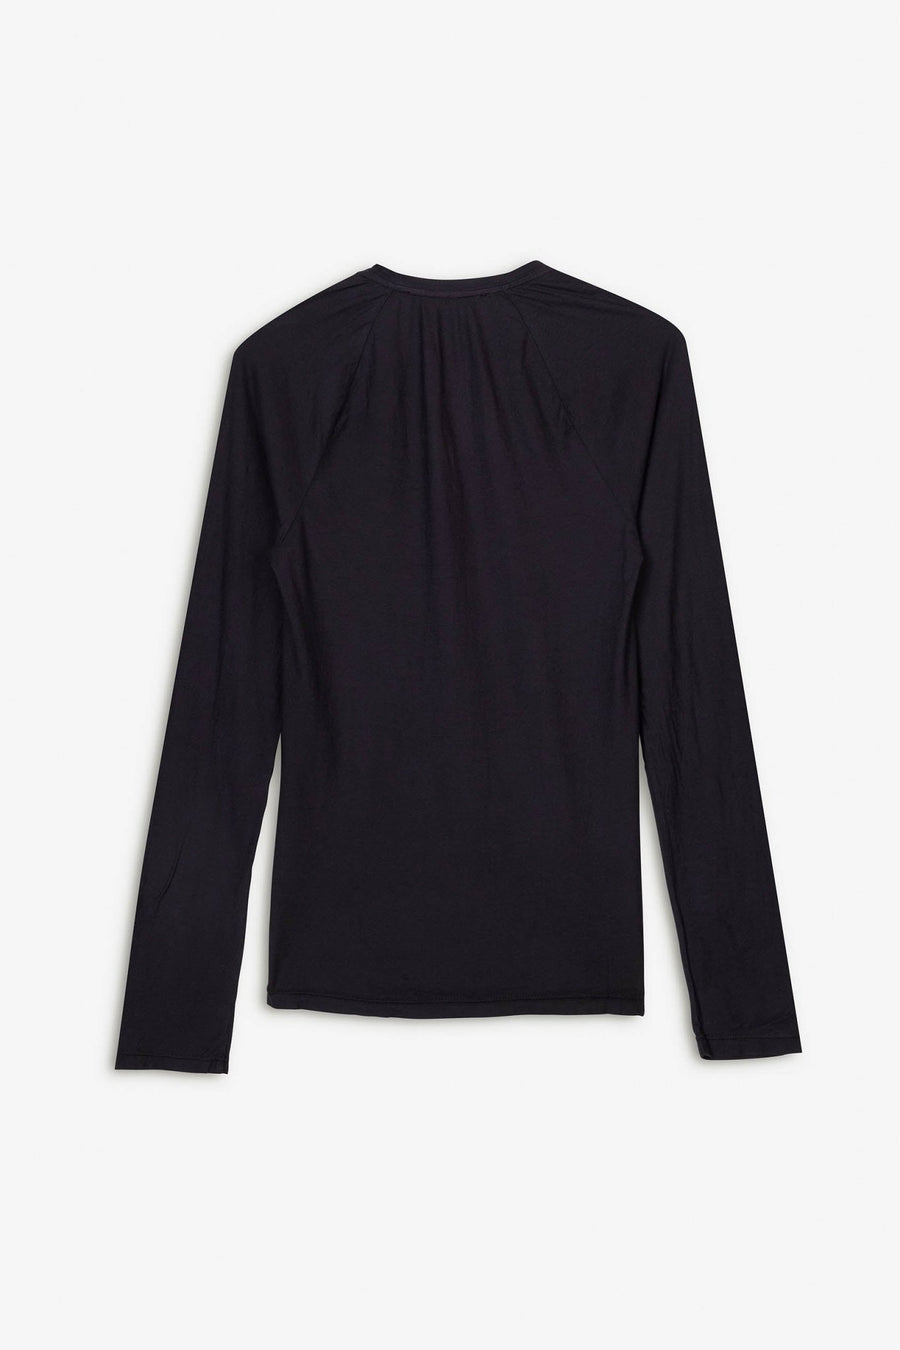 P.C.H. LONG SLEEVE SCOOP NECK TEE, BLACK - Burning Torch Online Boutique